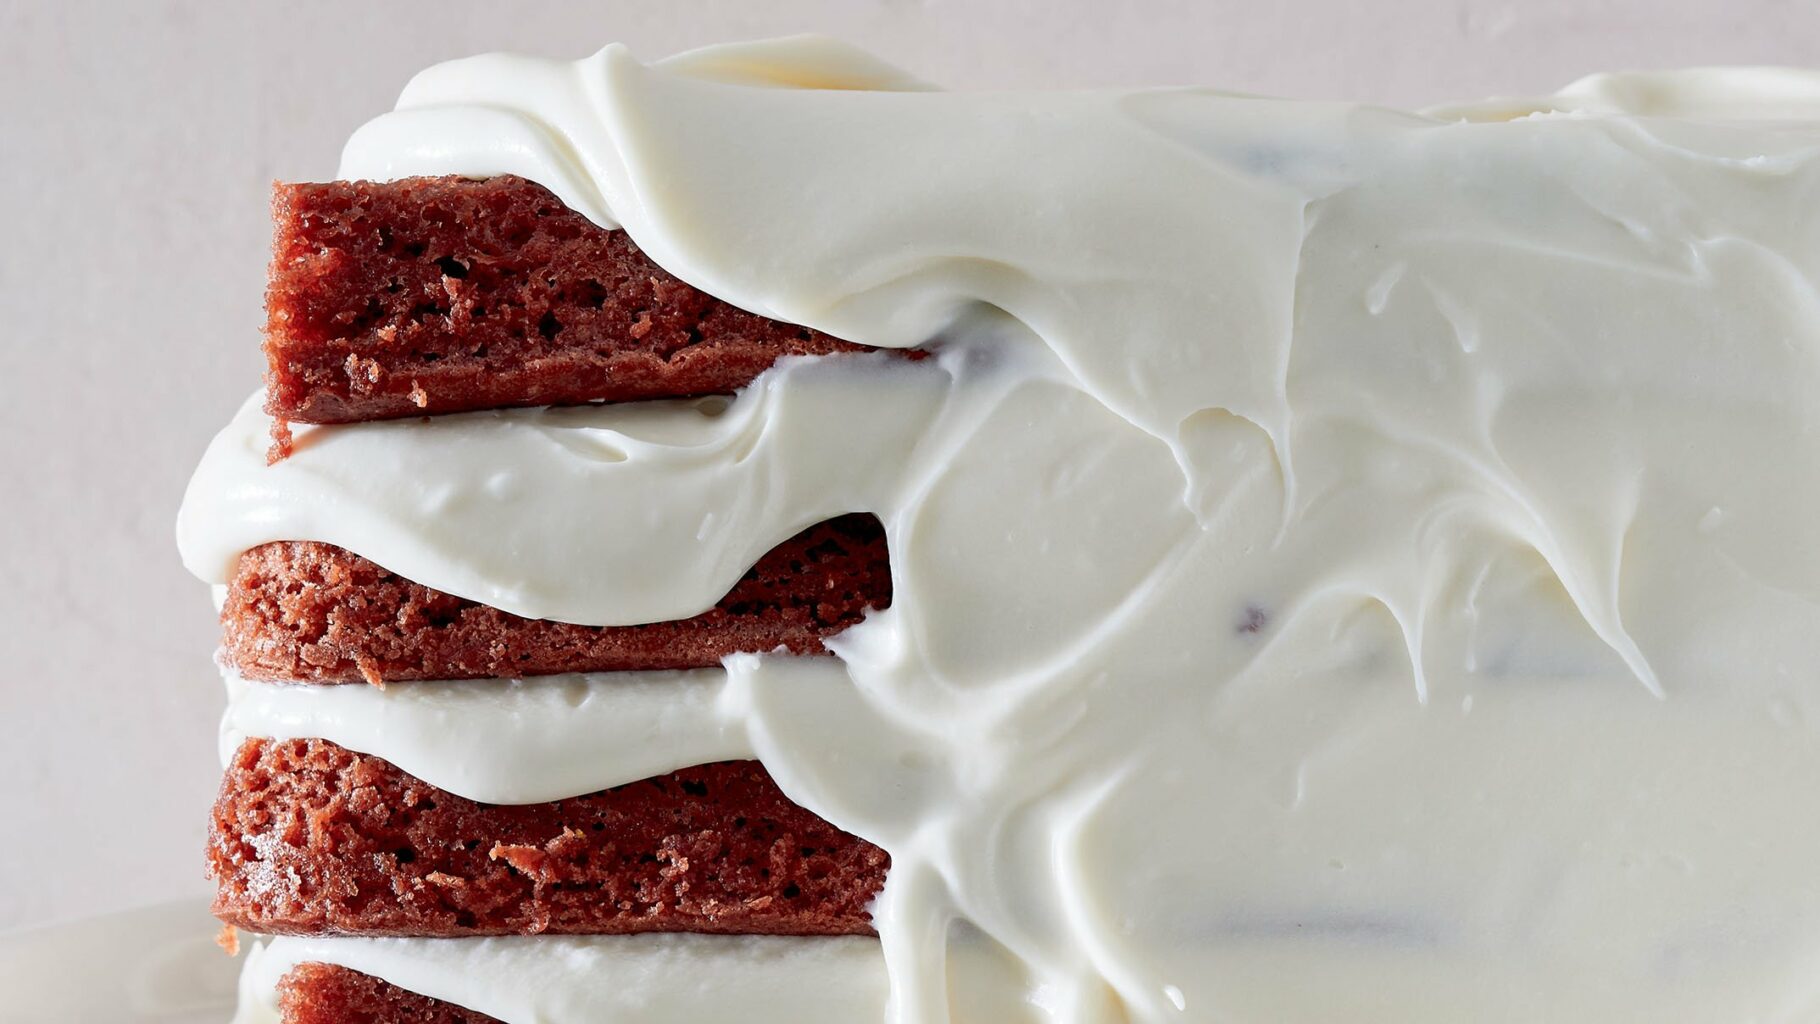 Red Velvet Cake recipe from Sheet Pan Sweets by Molly Gilbert